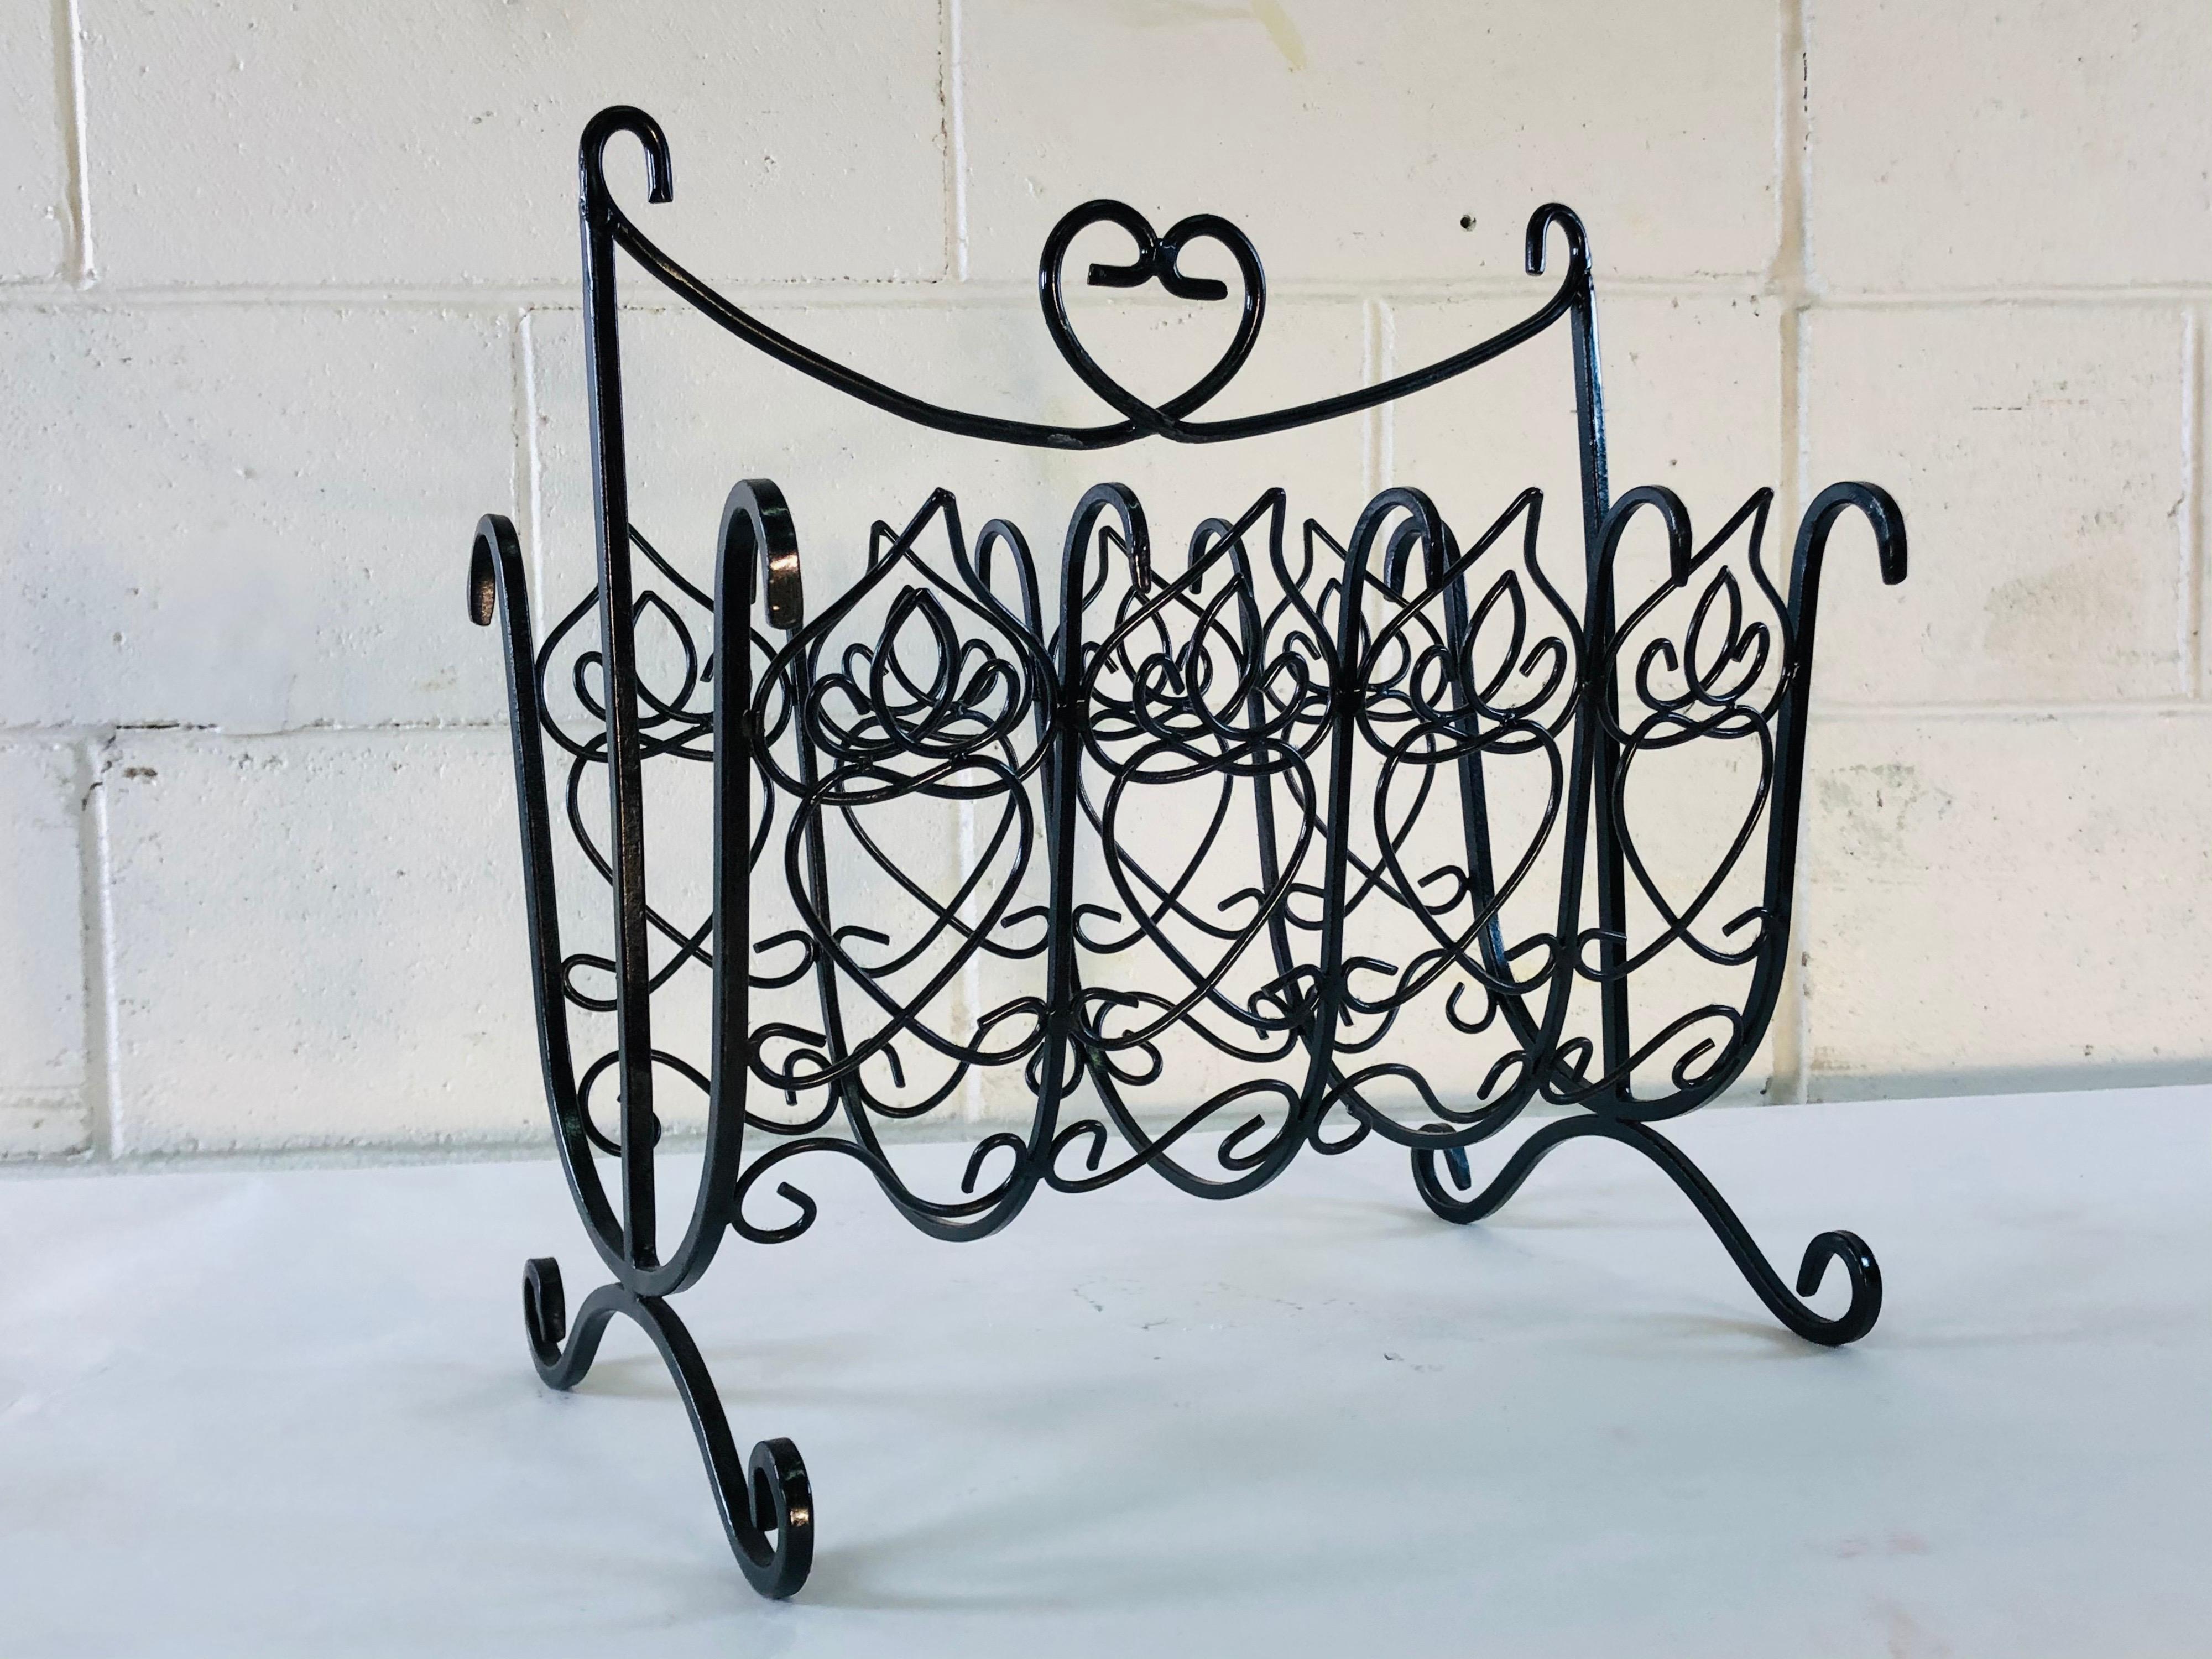 Vintage 1960s black iron handled magazine rack with a heart handle. Beautifully designed rack with an intricate design. Excellent condition. No marks.